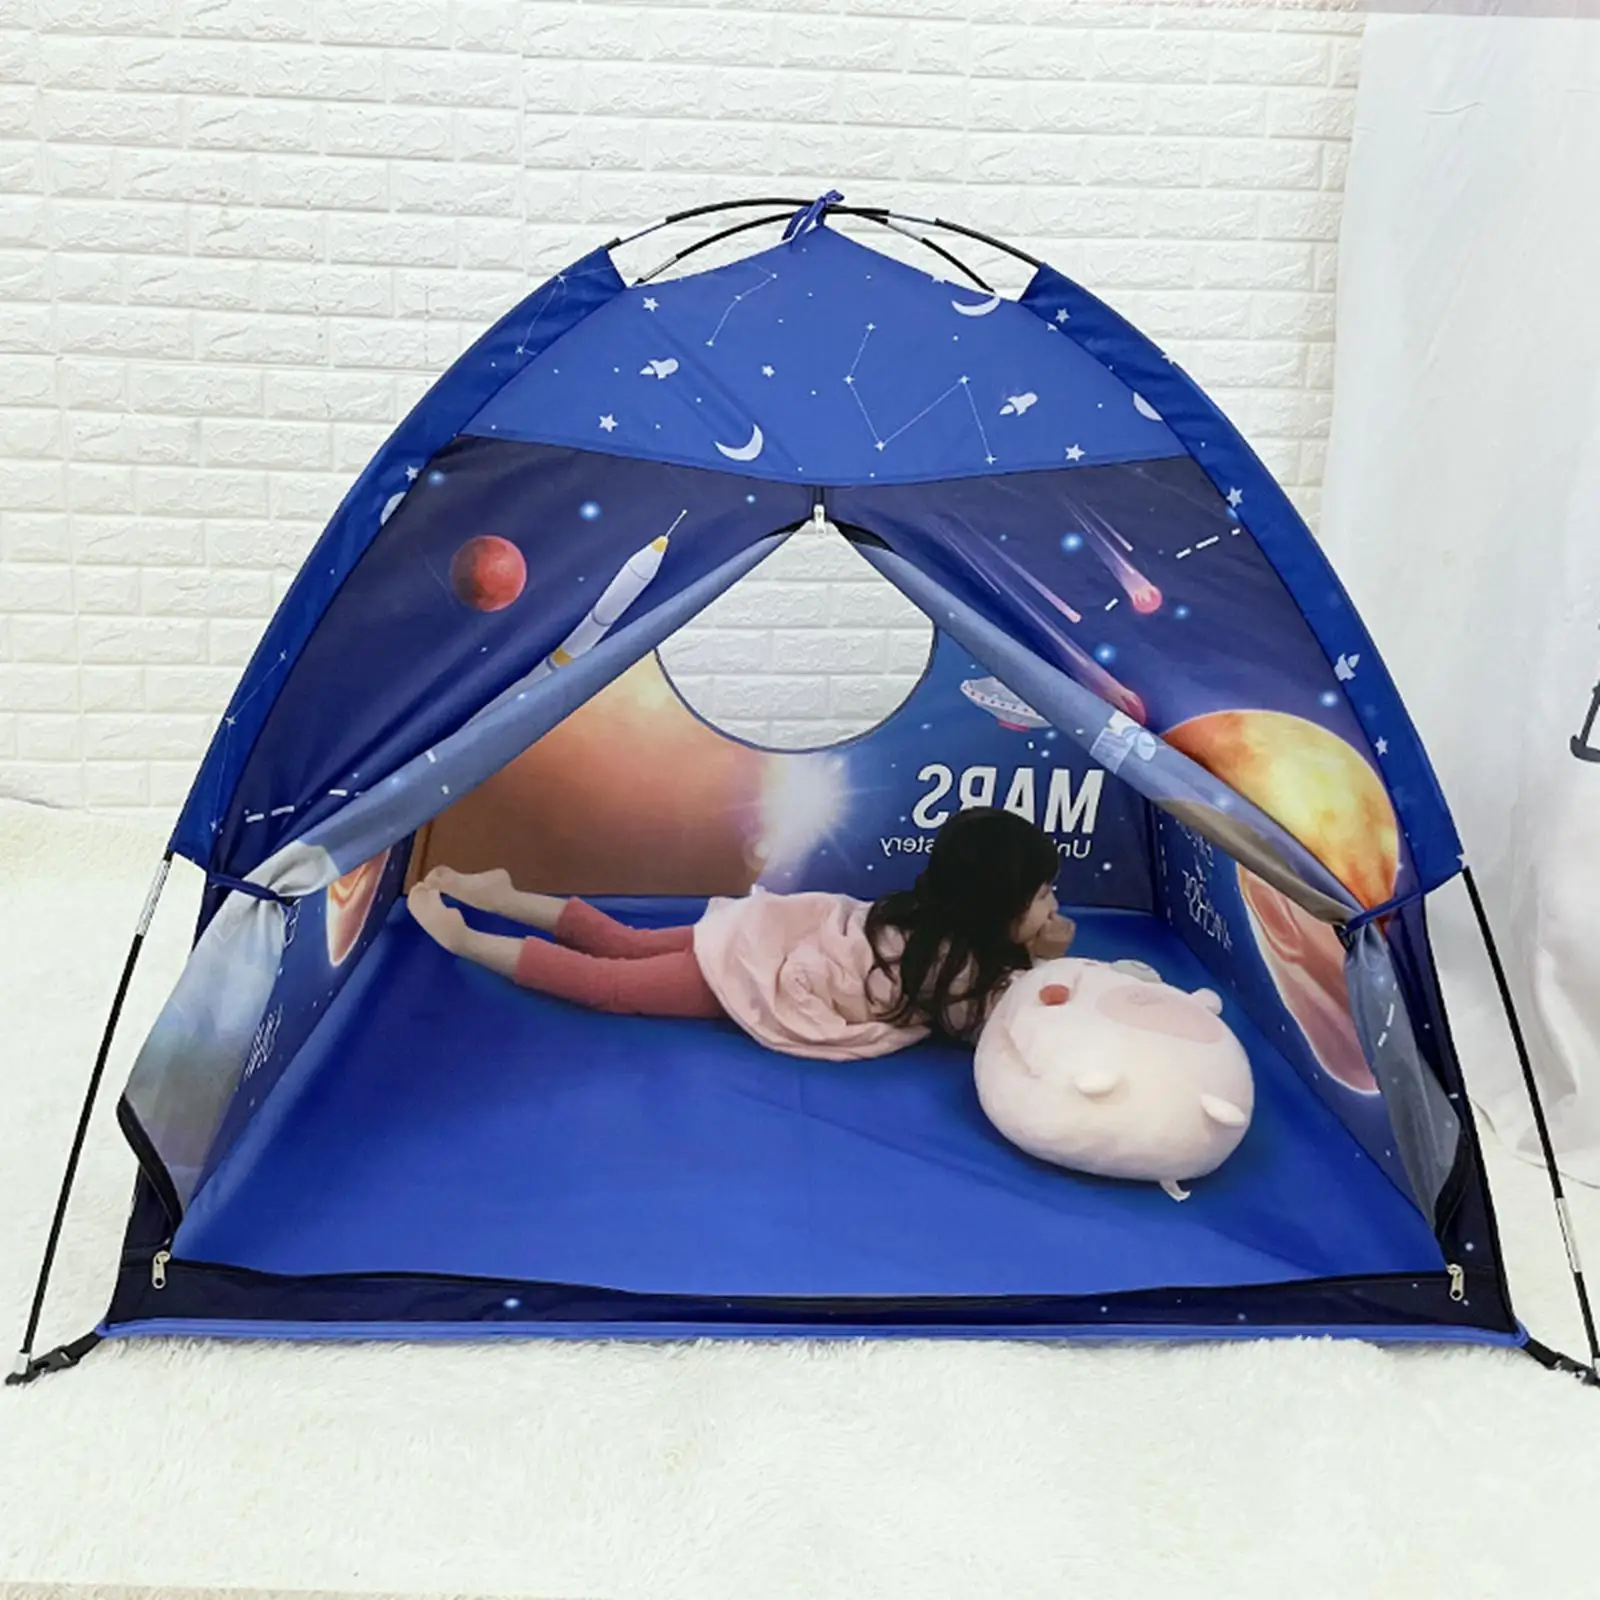 Playhouse Tent Toy Portable Baby Bedroom Furniture Playroom Indoor Outdoor Playhouse for Children Kids Toddlers Holiday Gifts